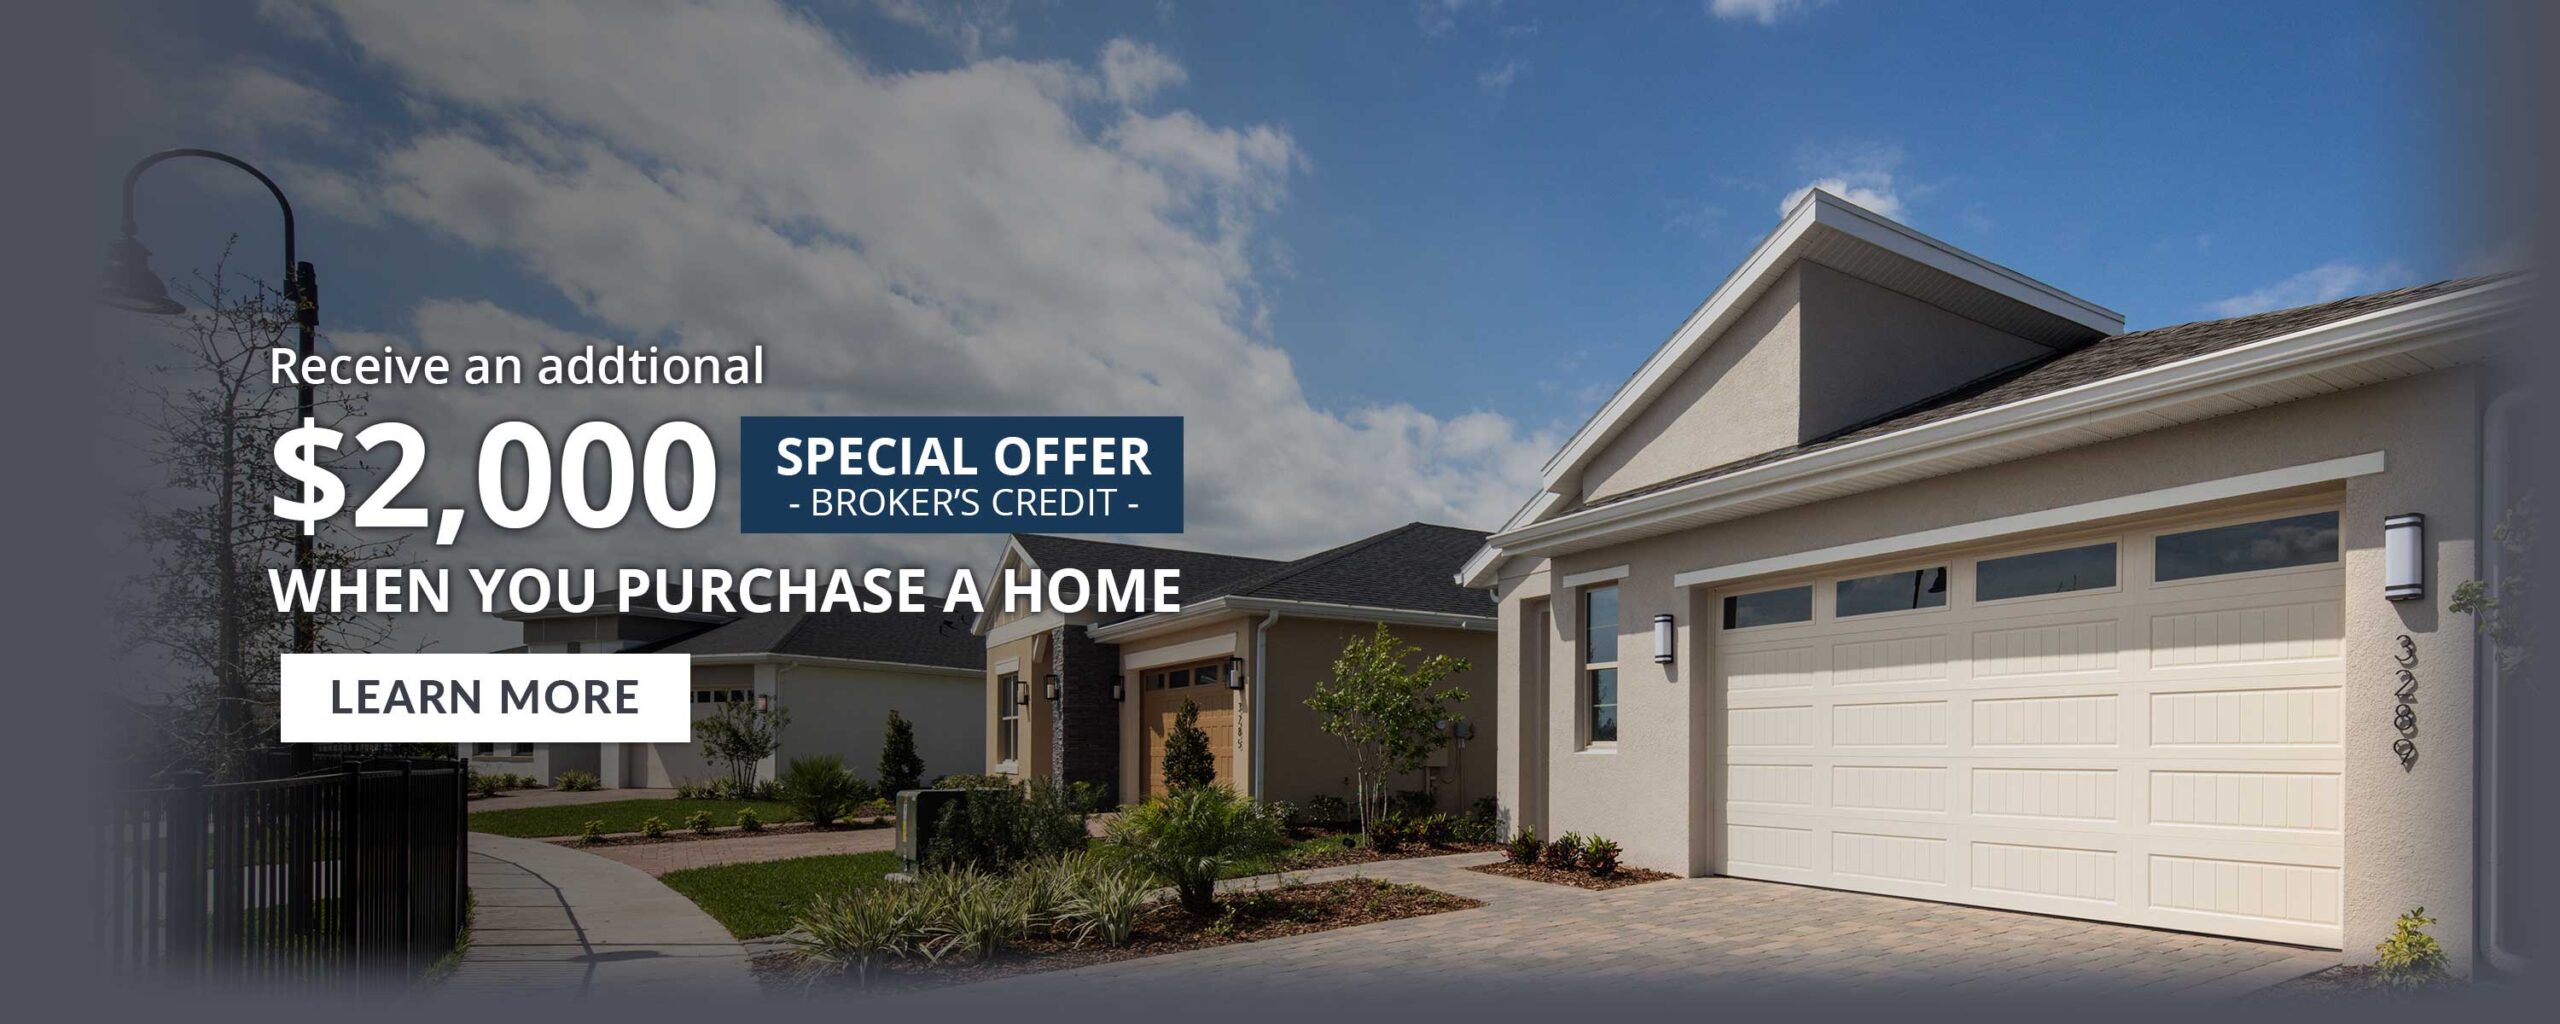 Offer | $2,000 Broker’s Credit Florida home sale Harmony new home sale